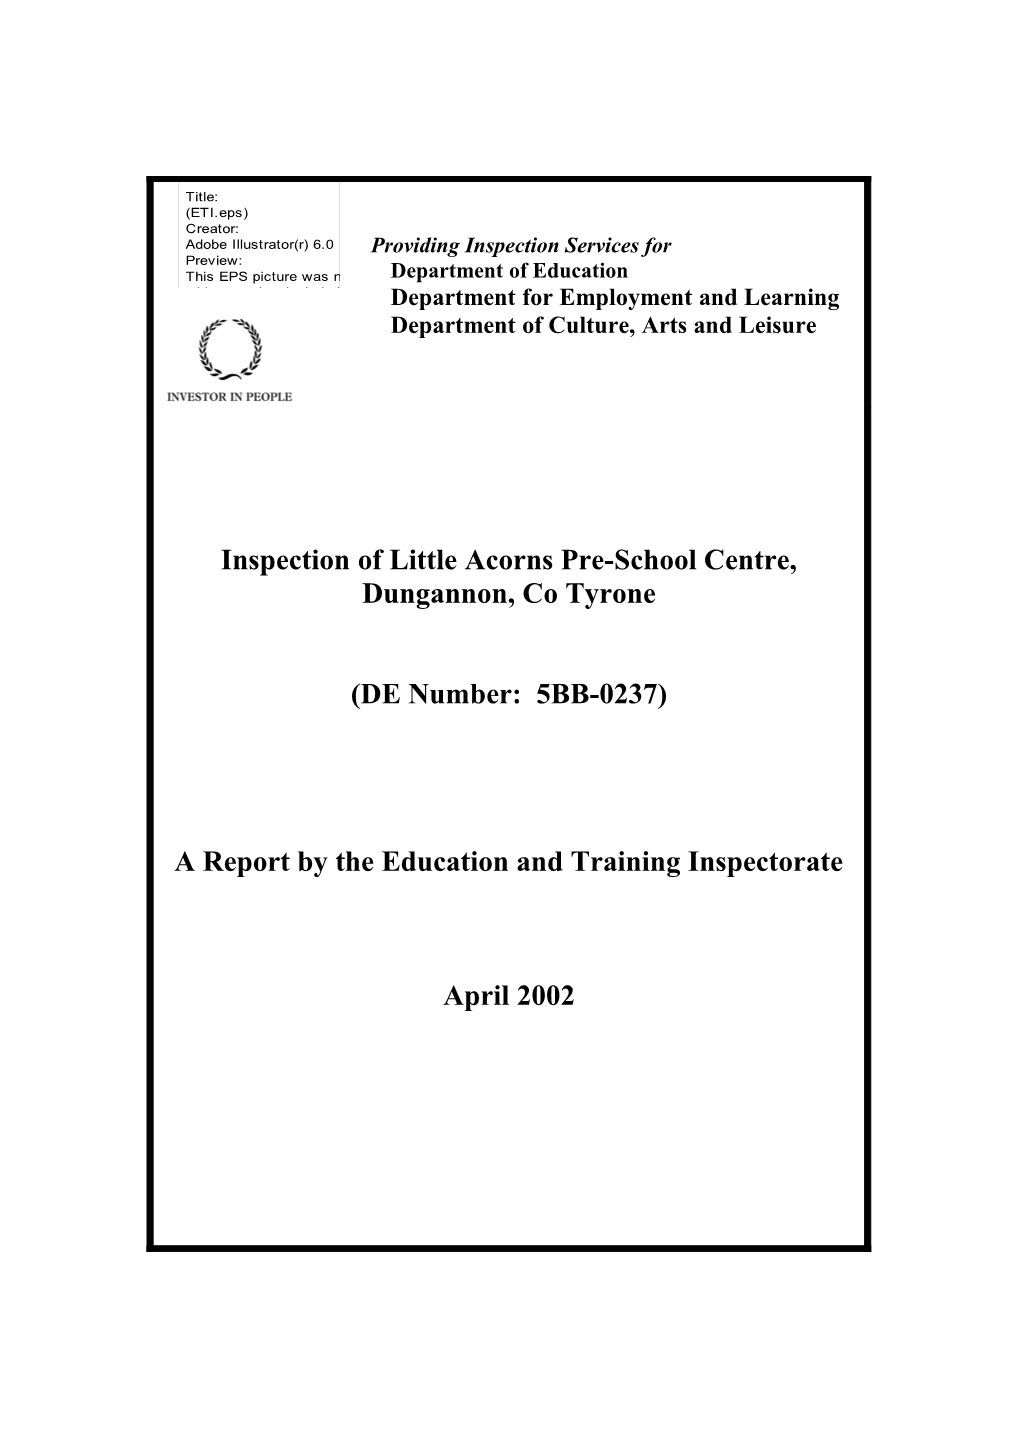 Report on the Inspection of Laghey Pre-School Centre, Dungannon, Co Tyrone, 17 April 2002